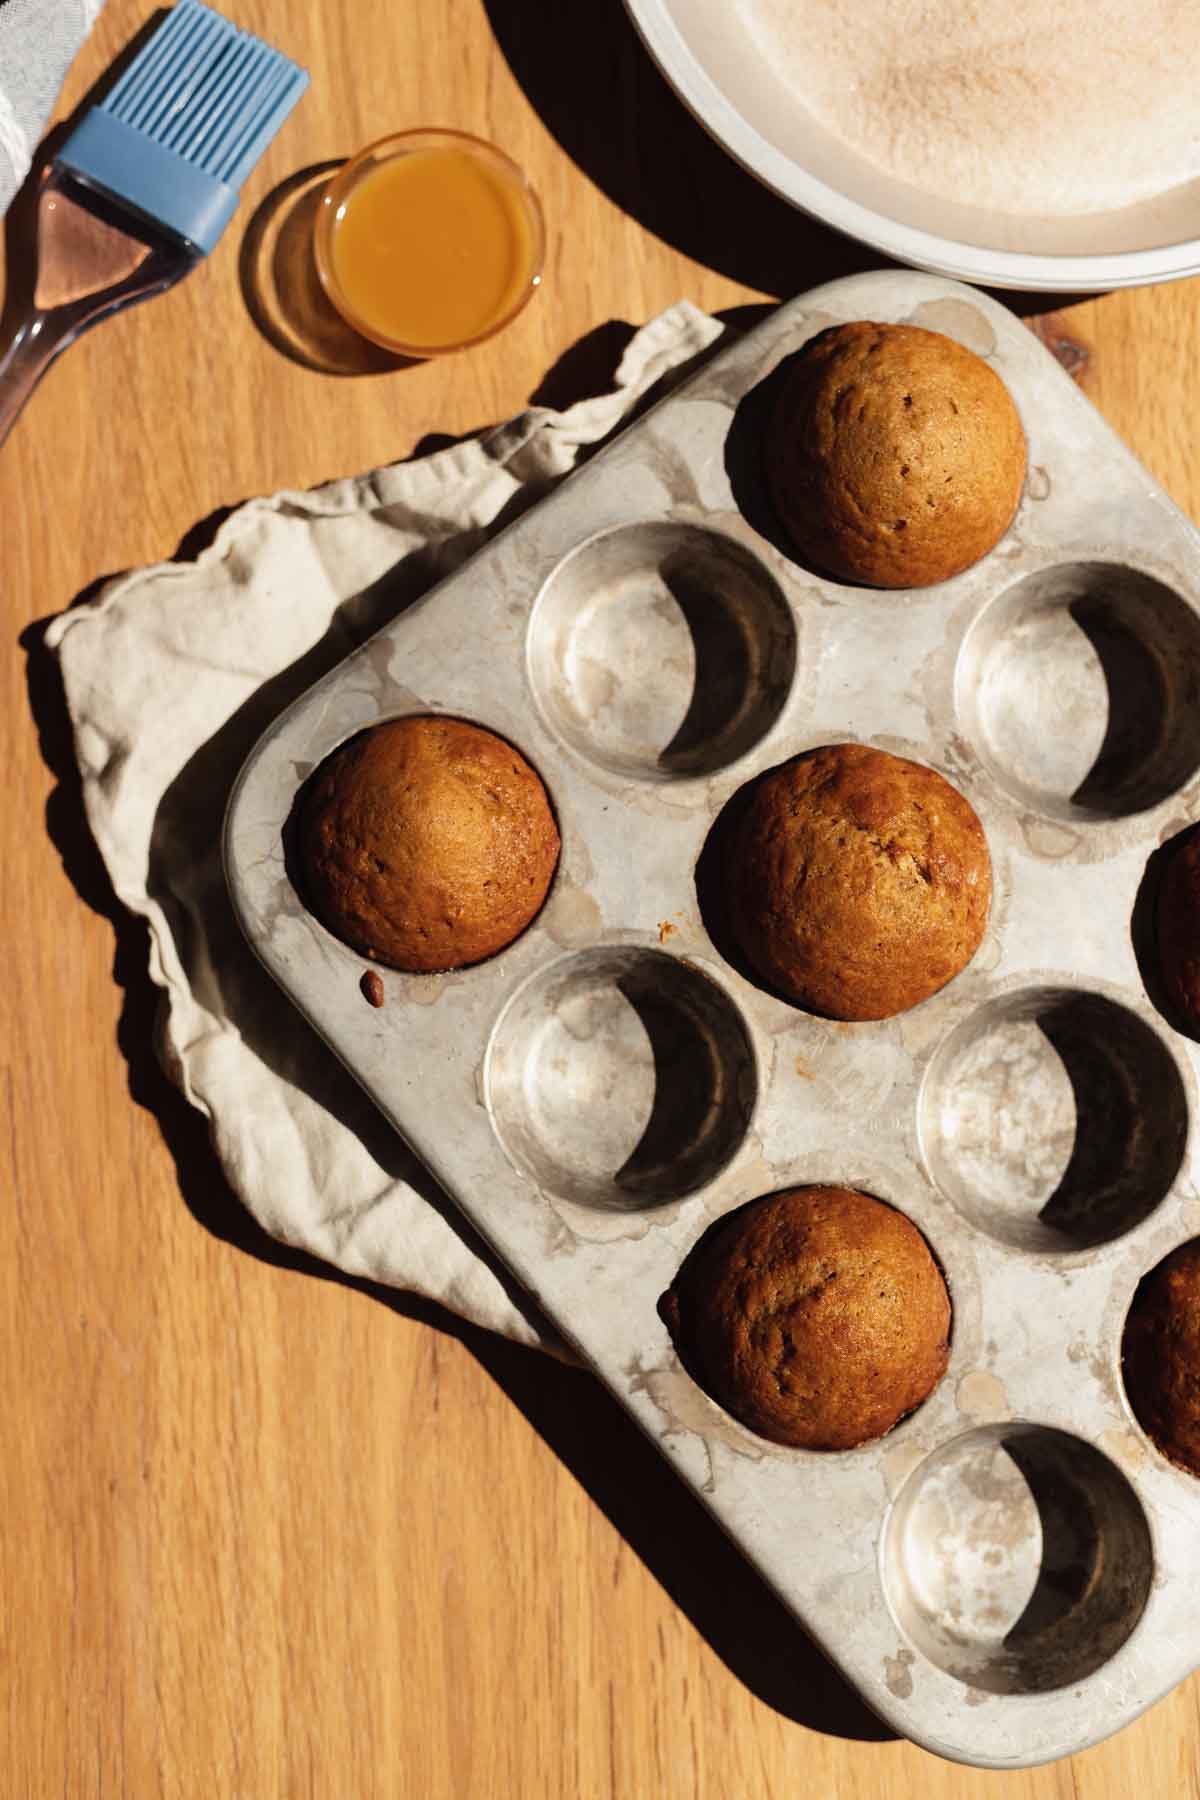 Baked tall muffins